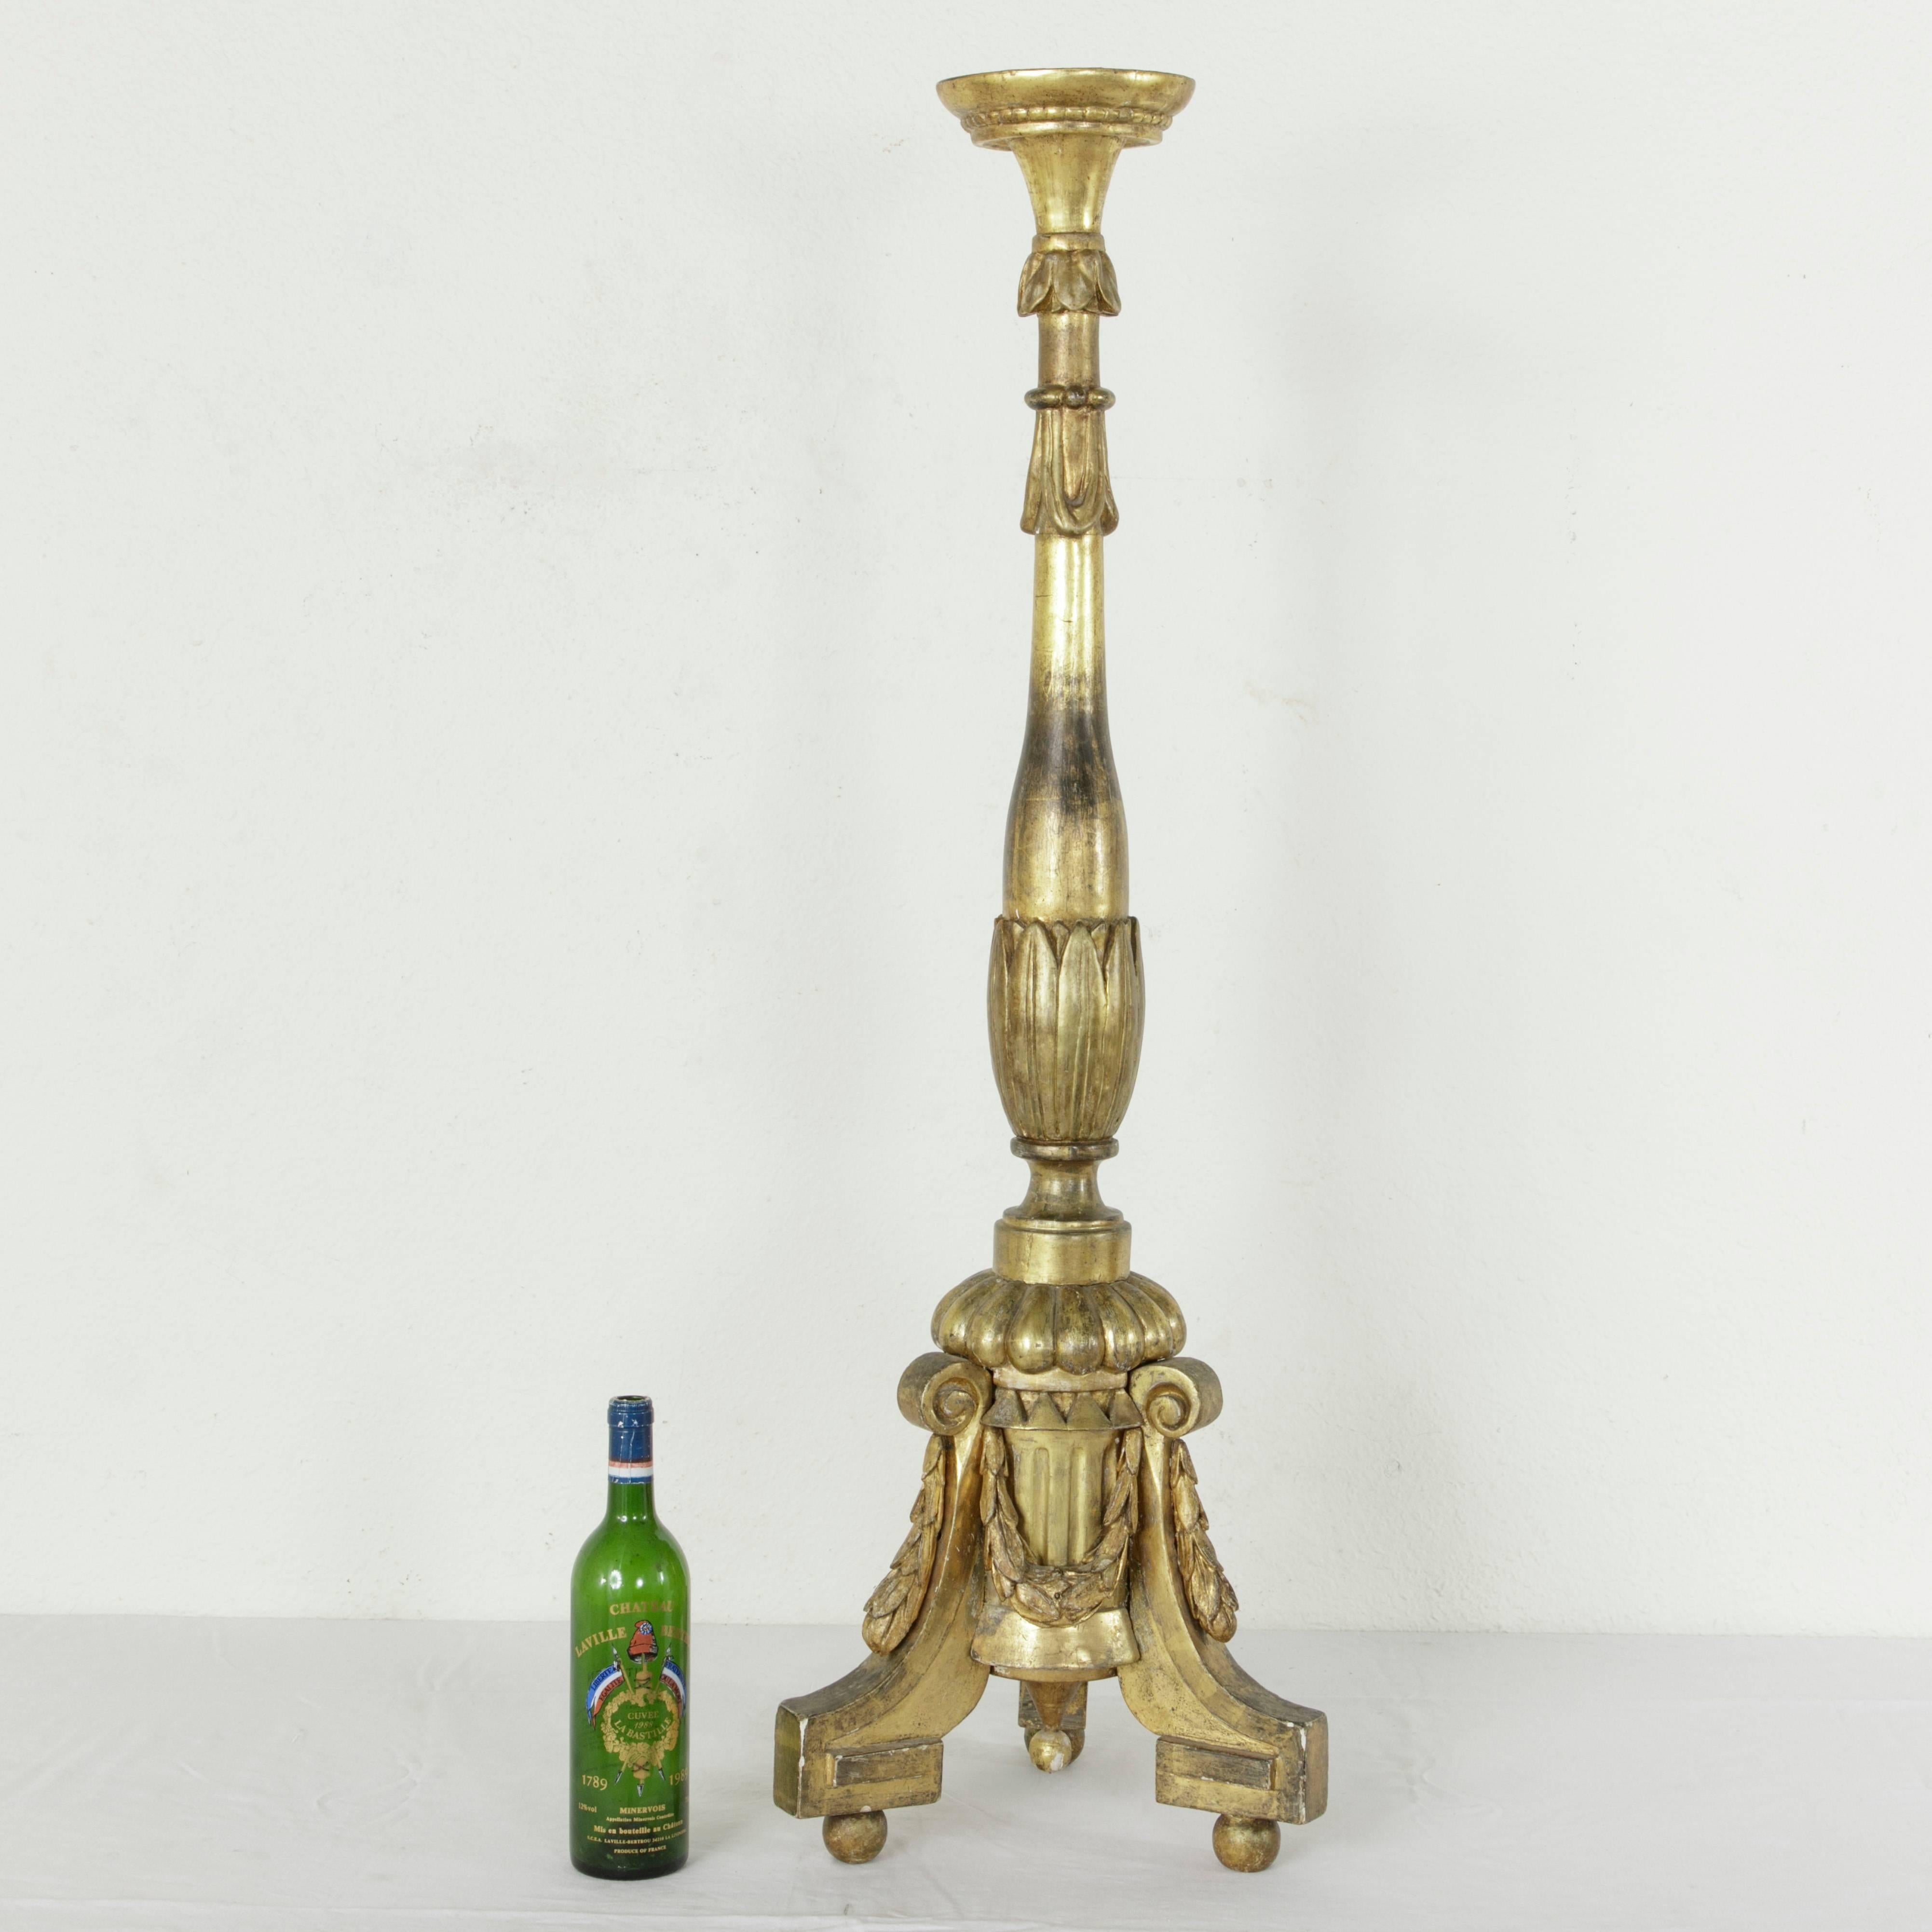 This impressively tall 19th century French Louis XVI style giltwood pricket or candlestick stands at 45 inches in height. Called a pic-cierge in French, this piece was originally used on the altar of a church in France. Hand-carved leaves adorn the